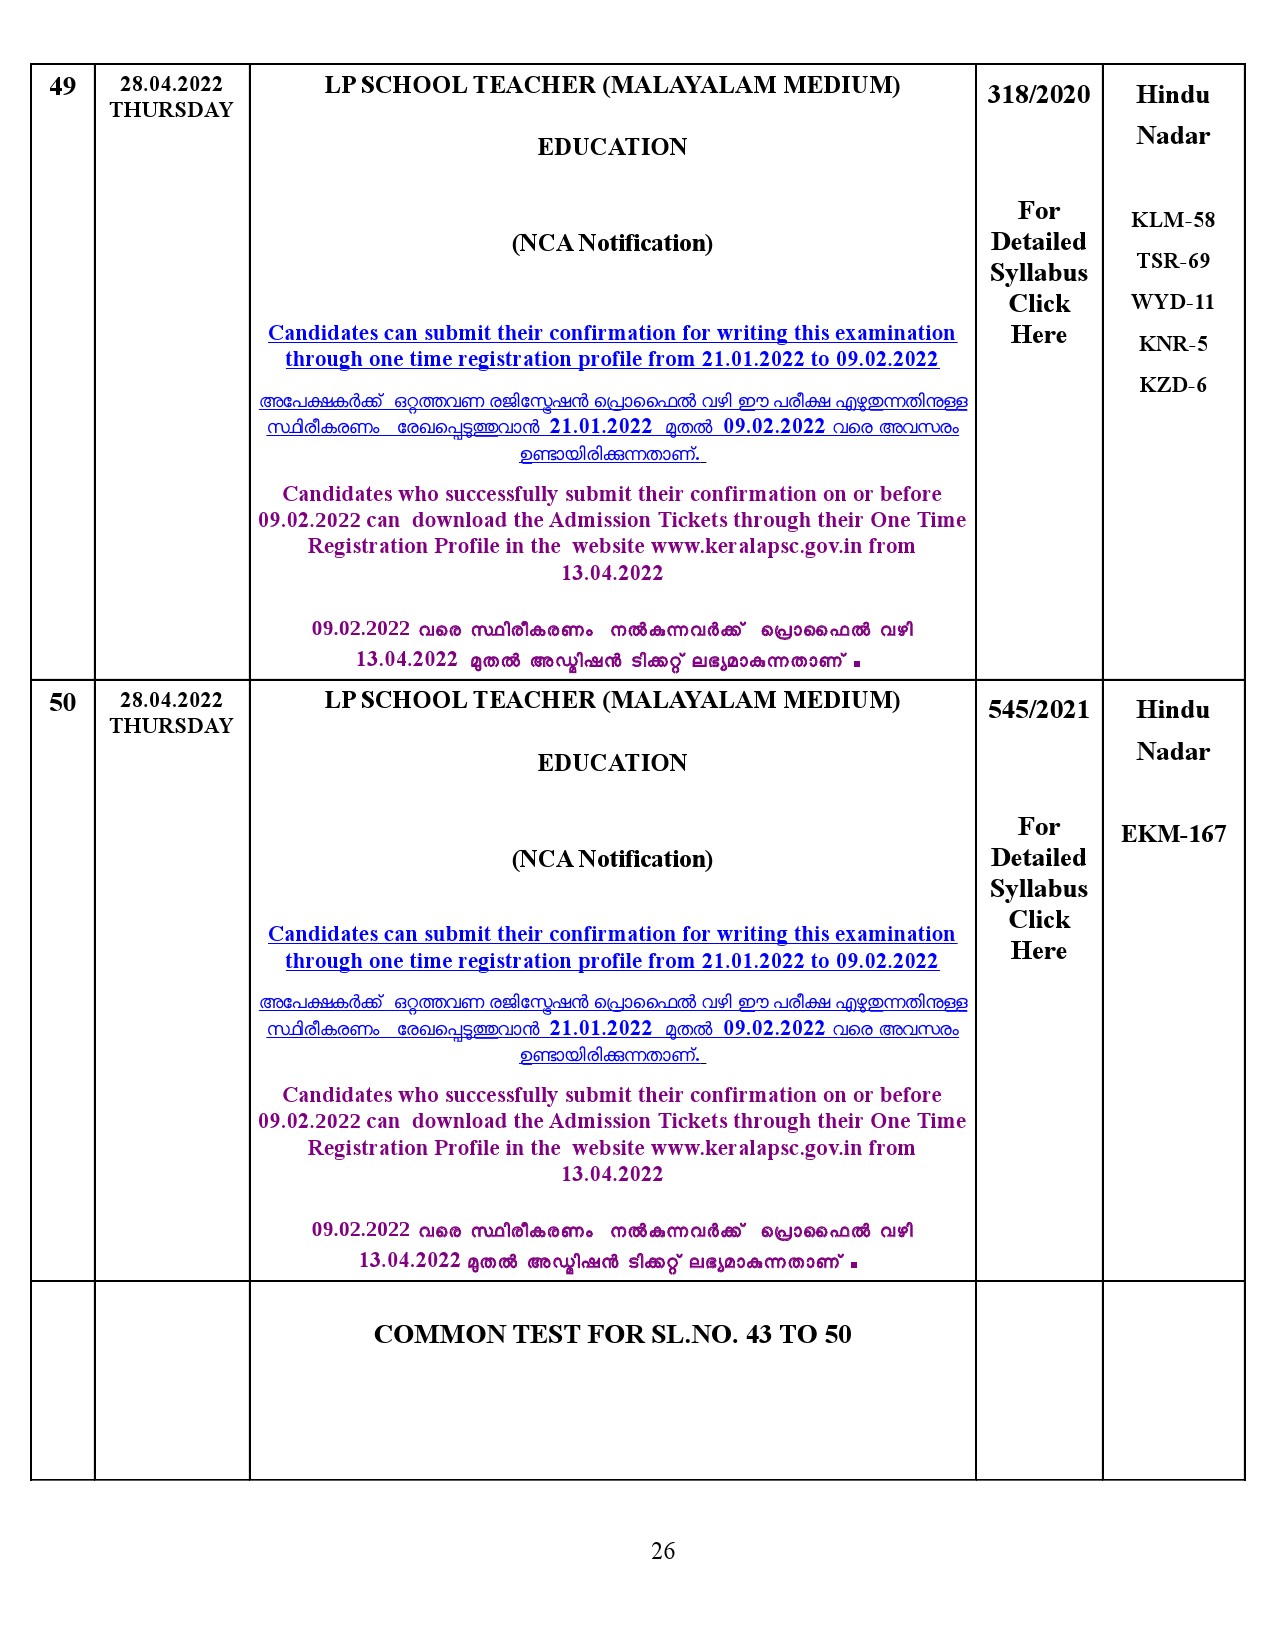 Examination Programme For The Month Of April 2022 - Notification Image 26